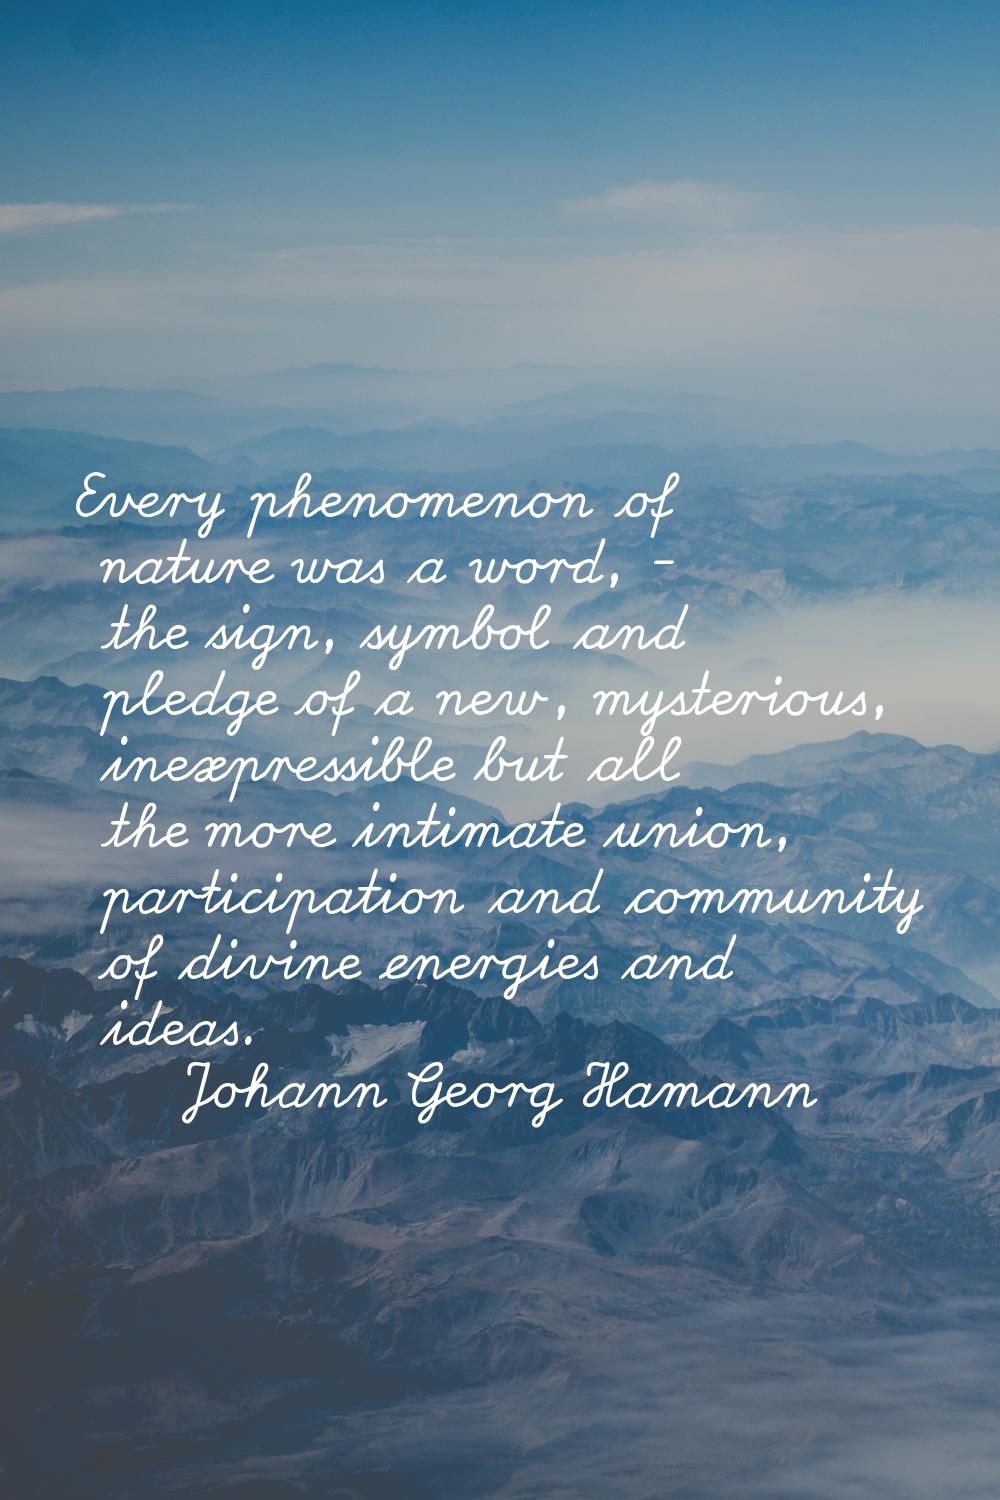 Every phenomenon of nature was a word, - the sign, symbol and pledge of a new, mysterious, inexpres